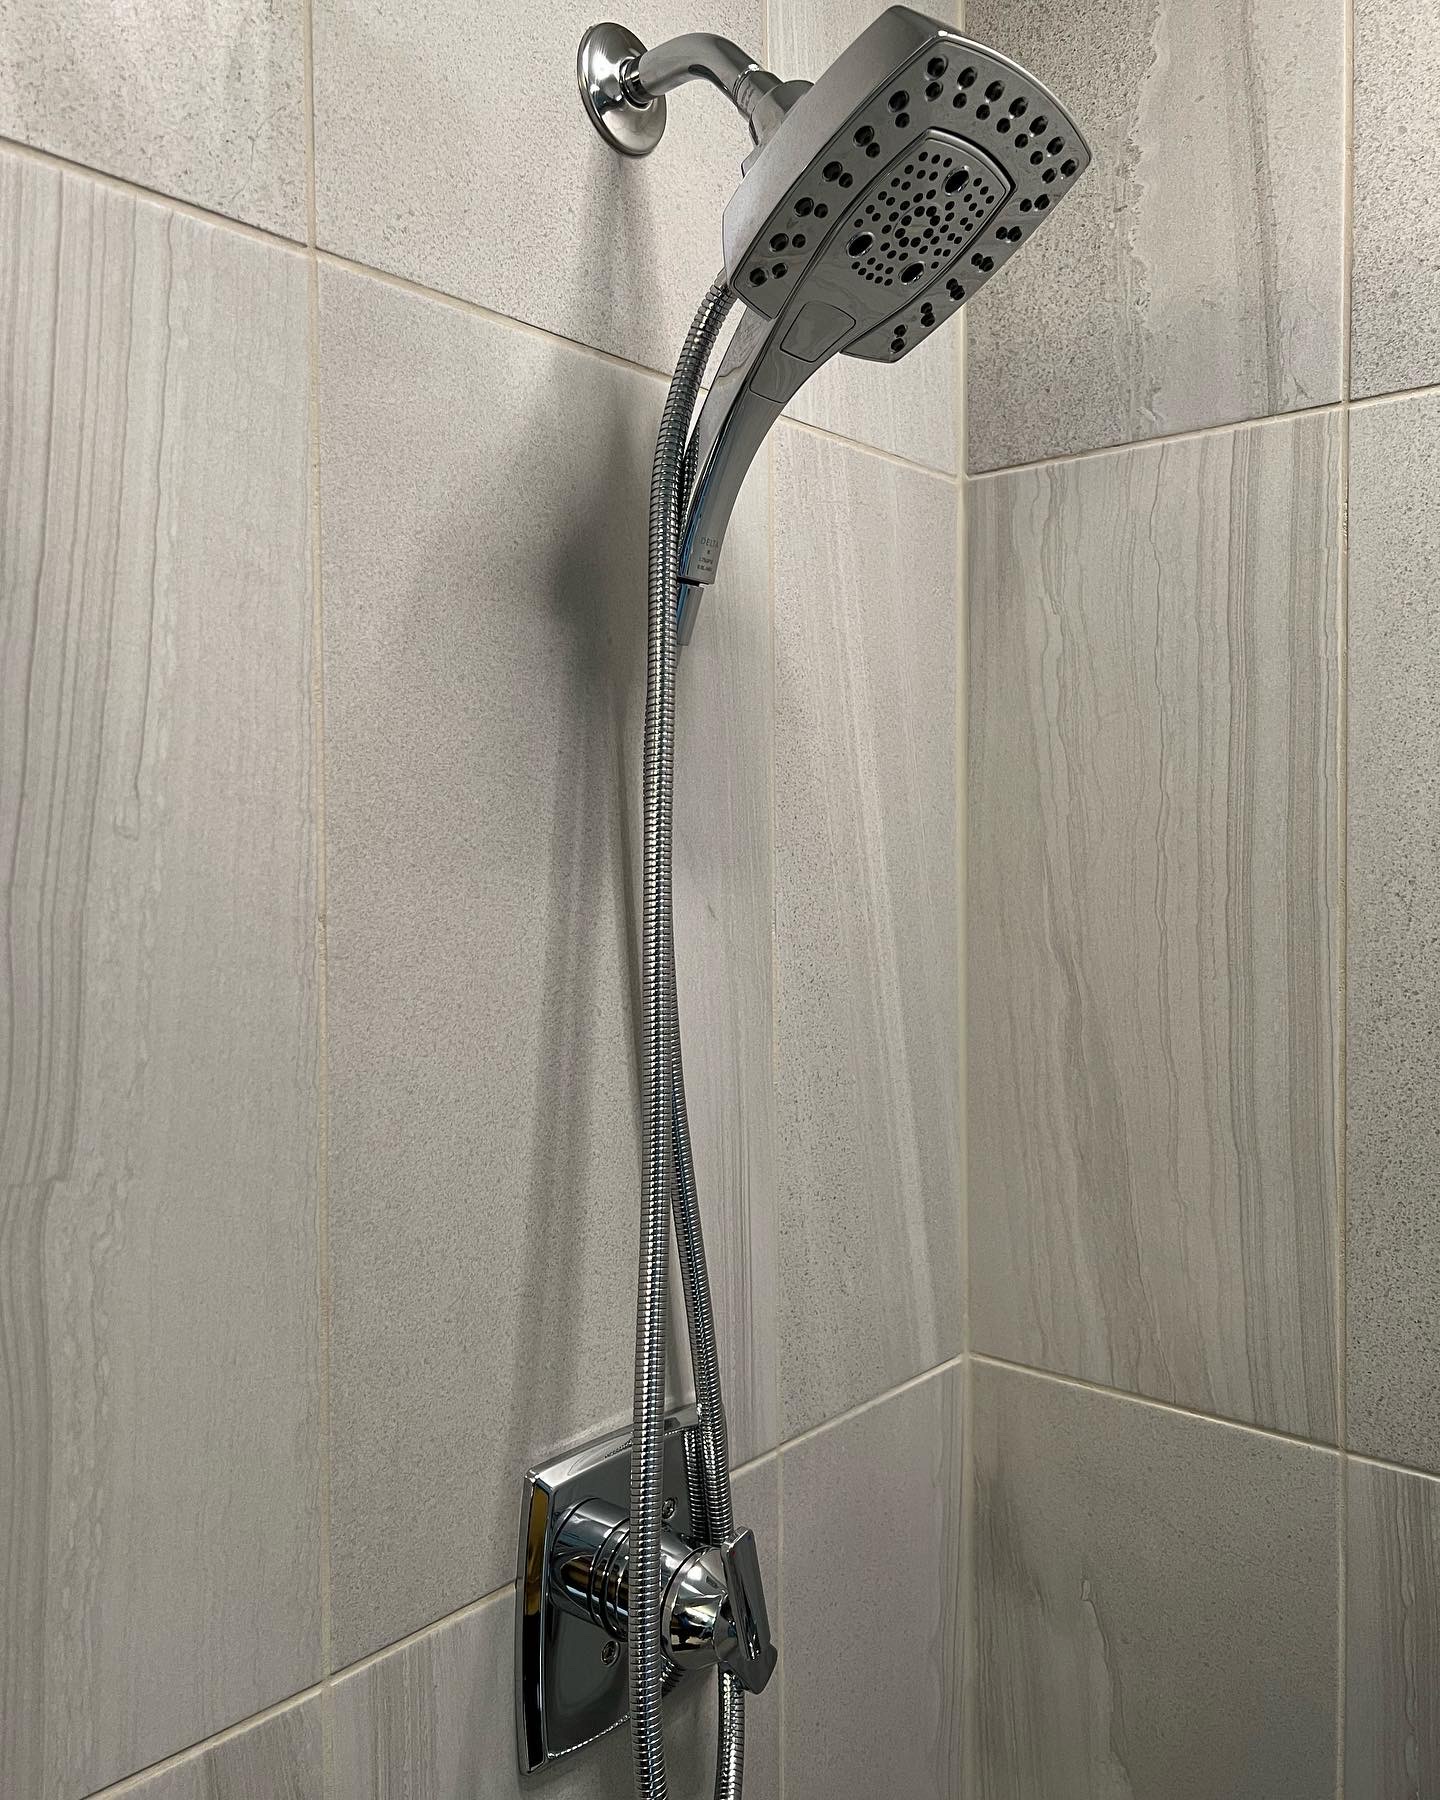 Classic bathroom remodeling, classic movable shower head